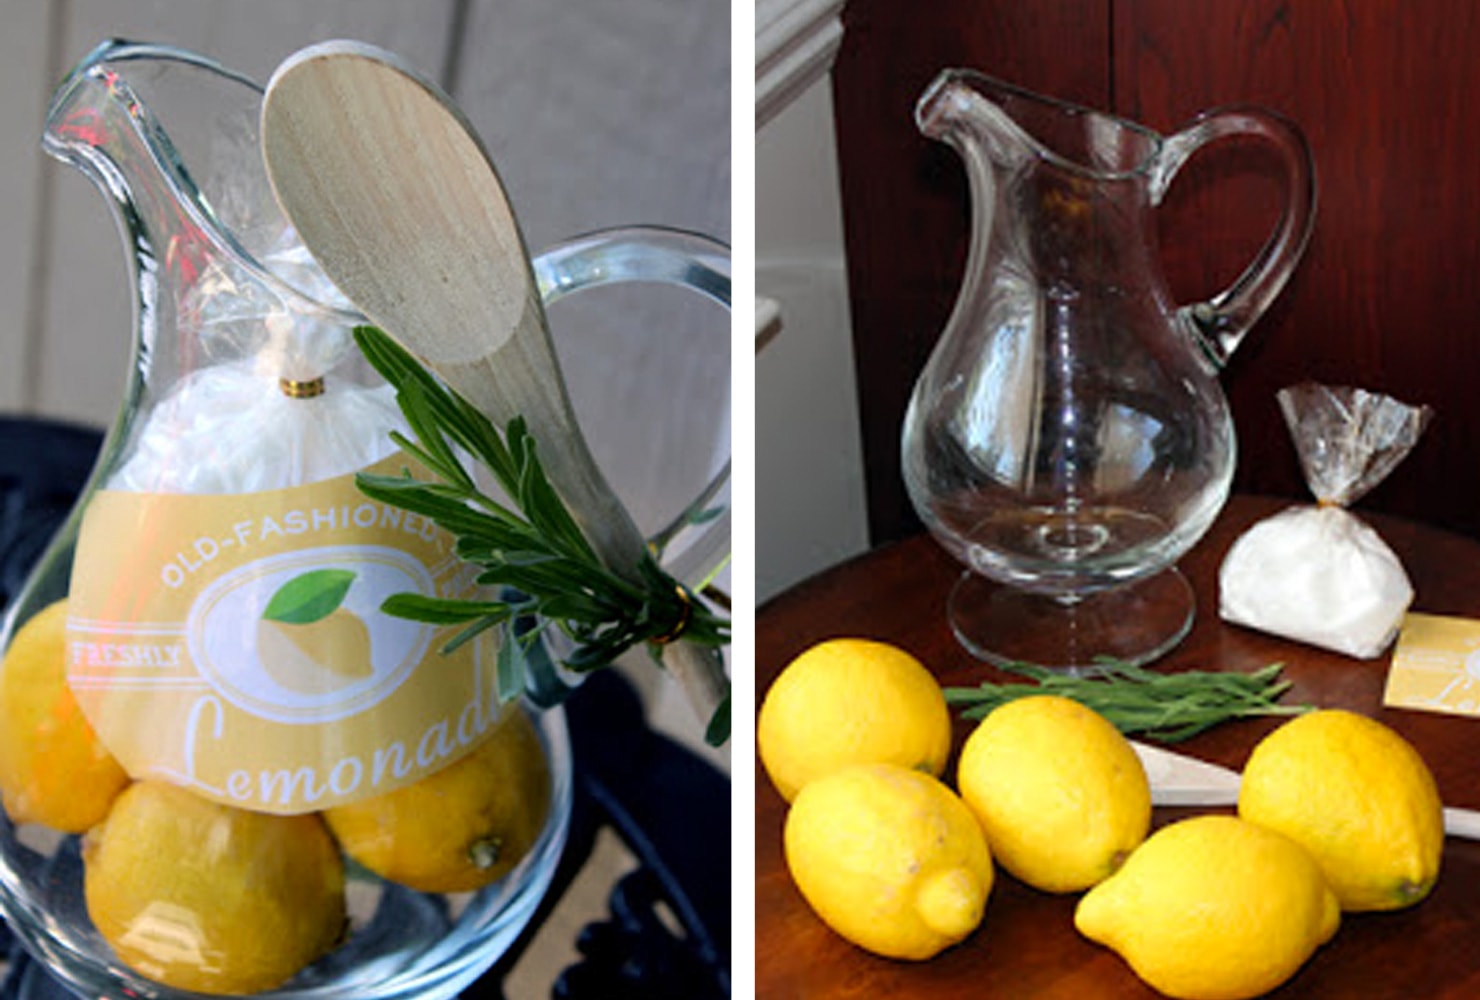 creative gift ideas lemonade kit with pitcher500